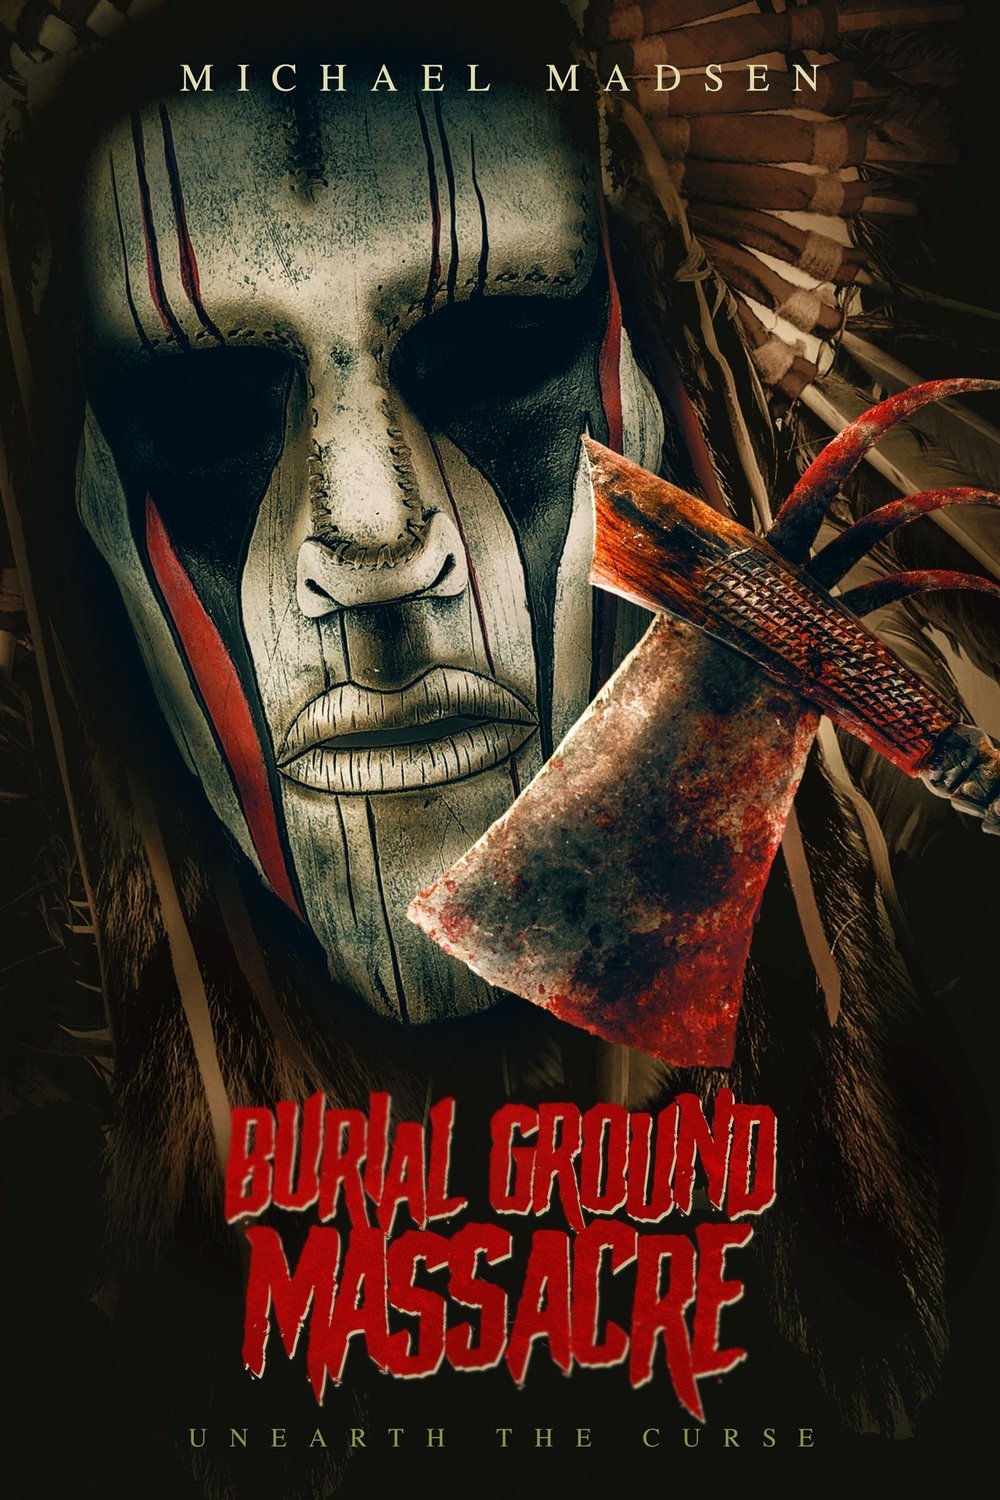 Poster of the movie Burial Ground Massacre